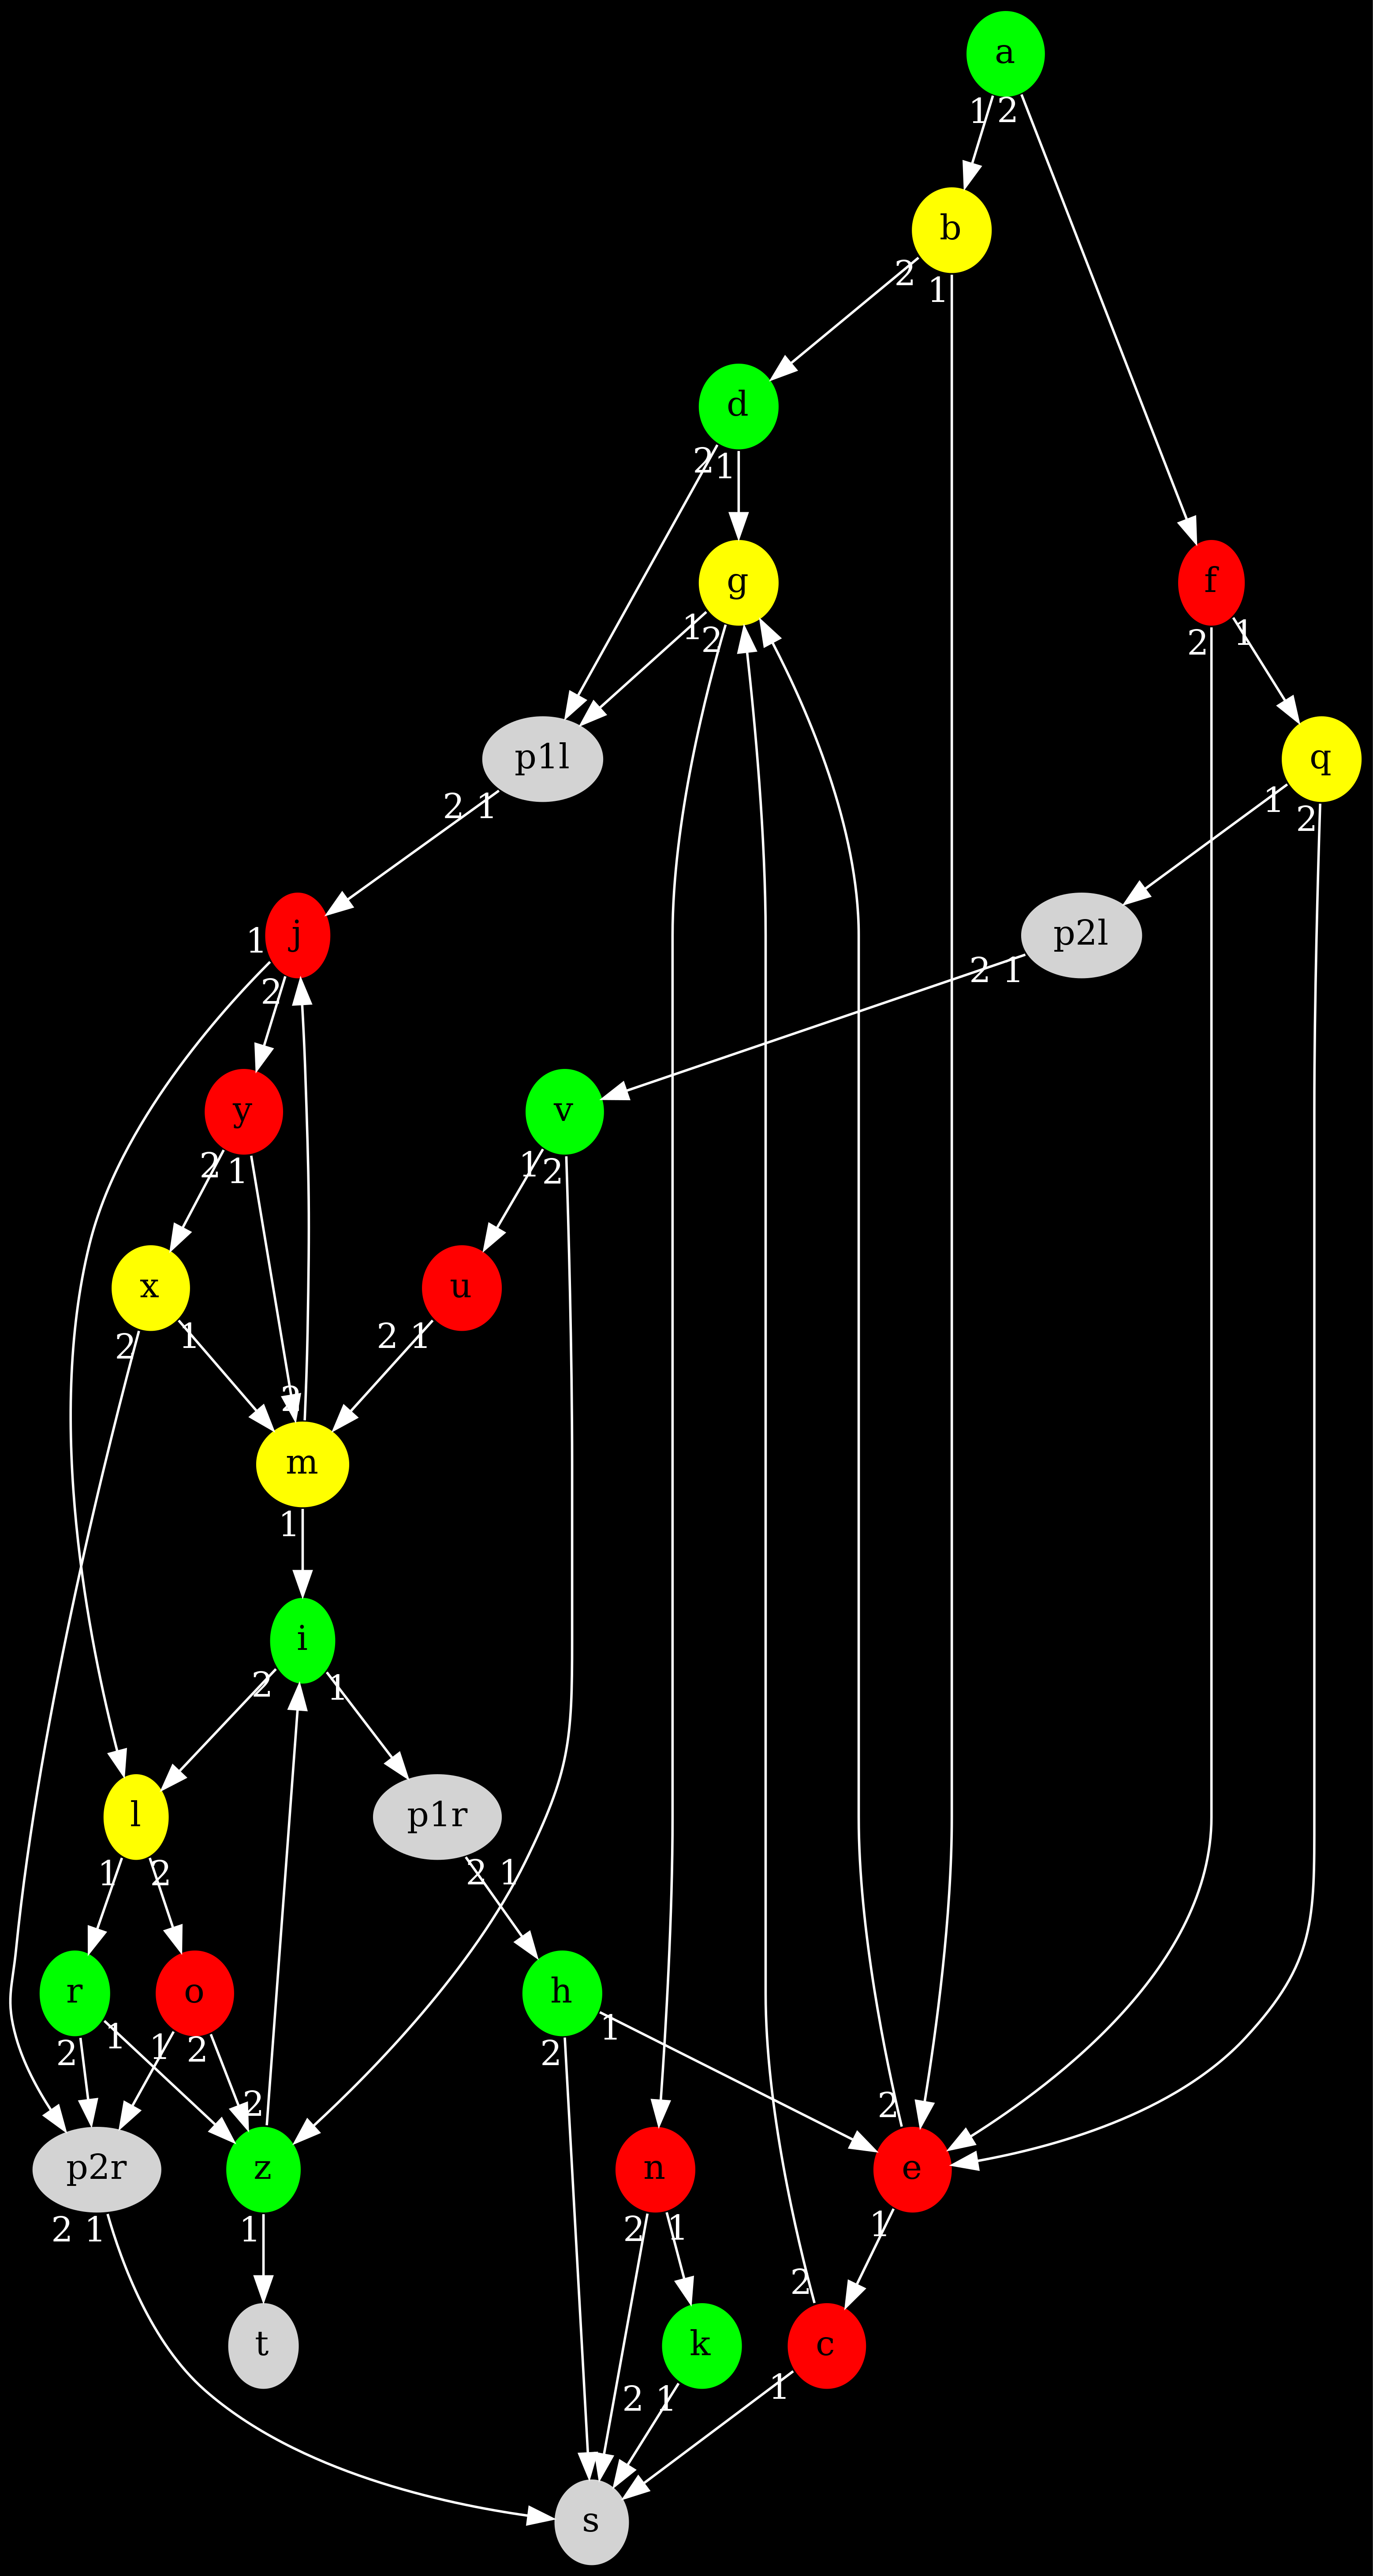 The graph modeling the instance